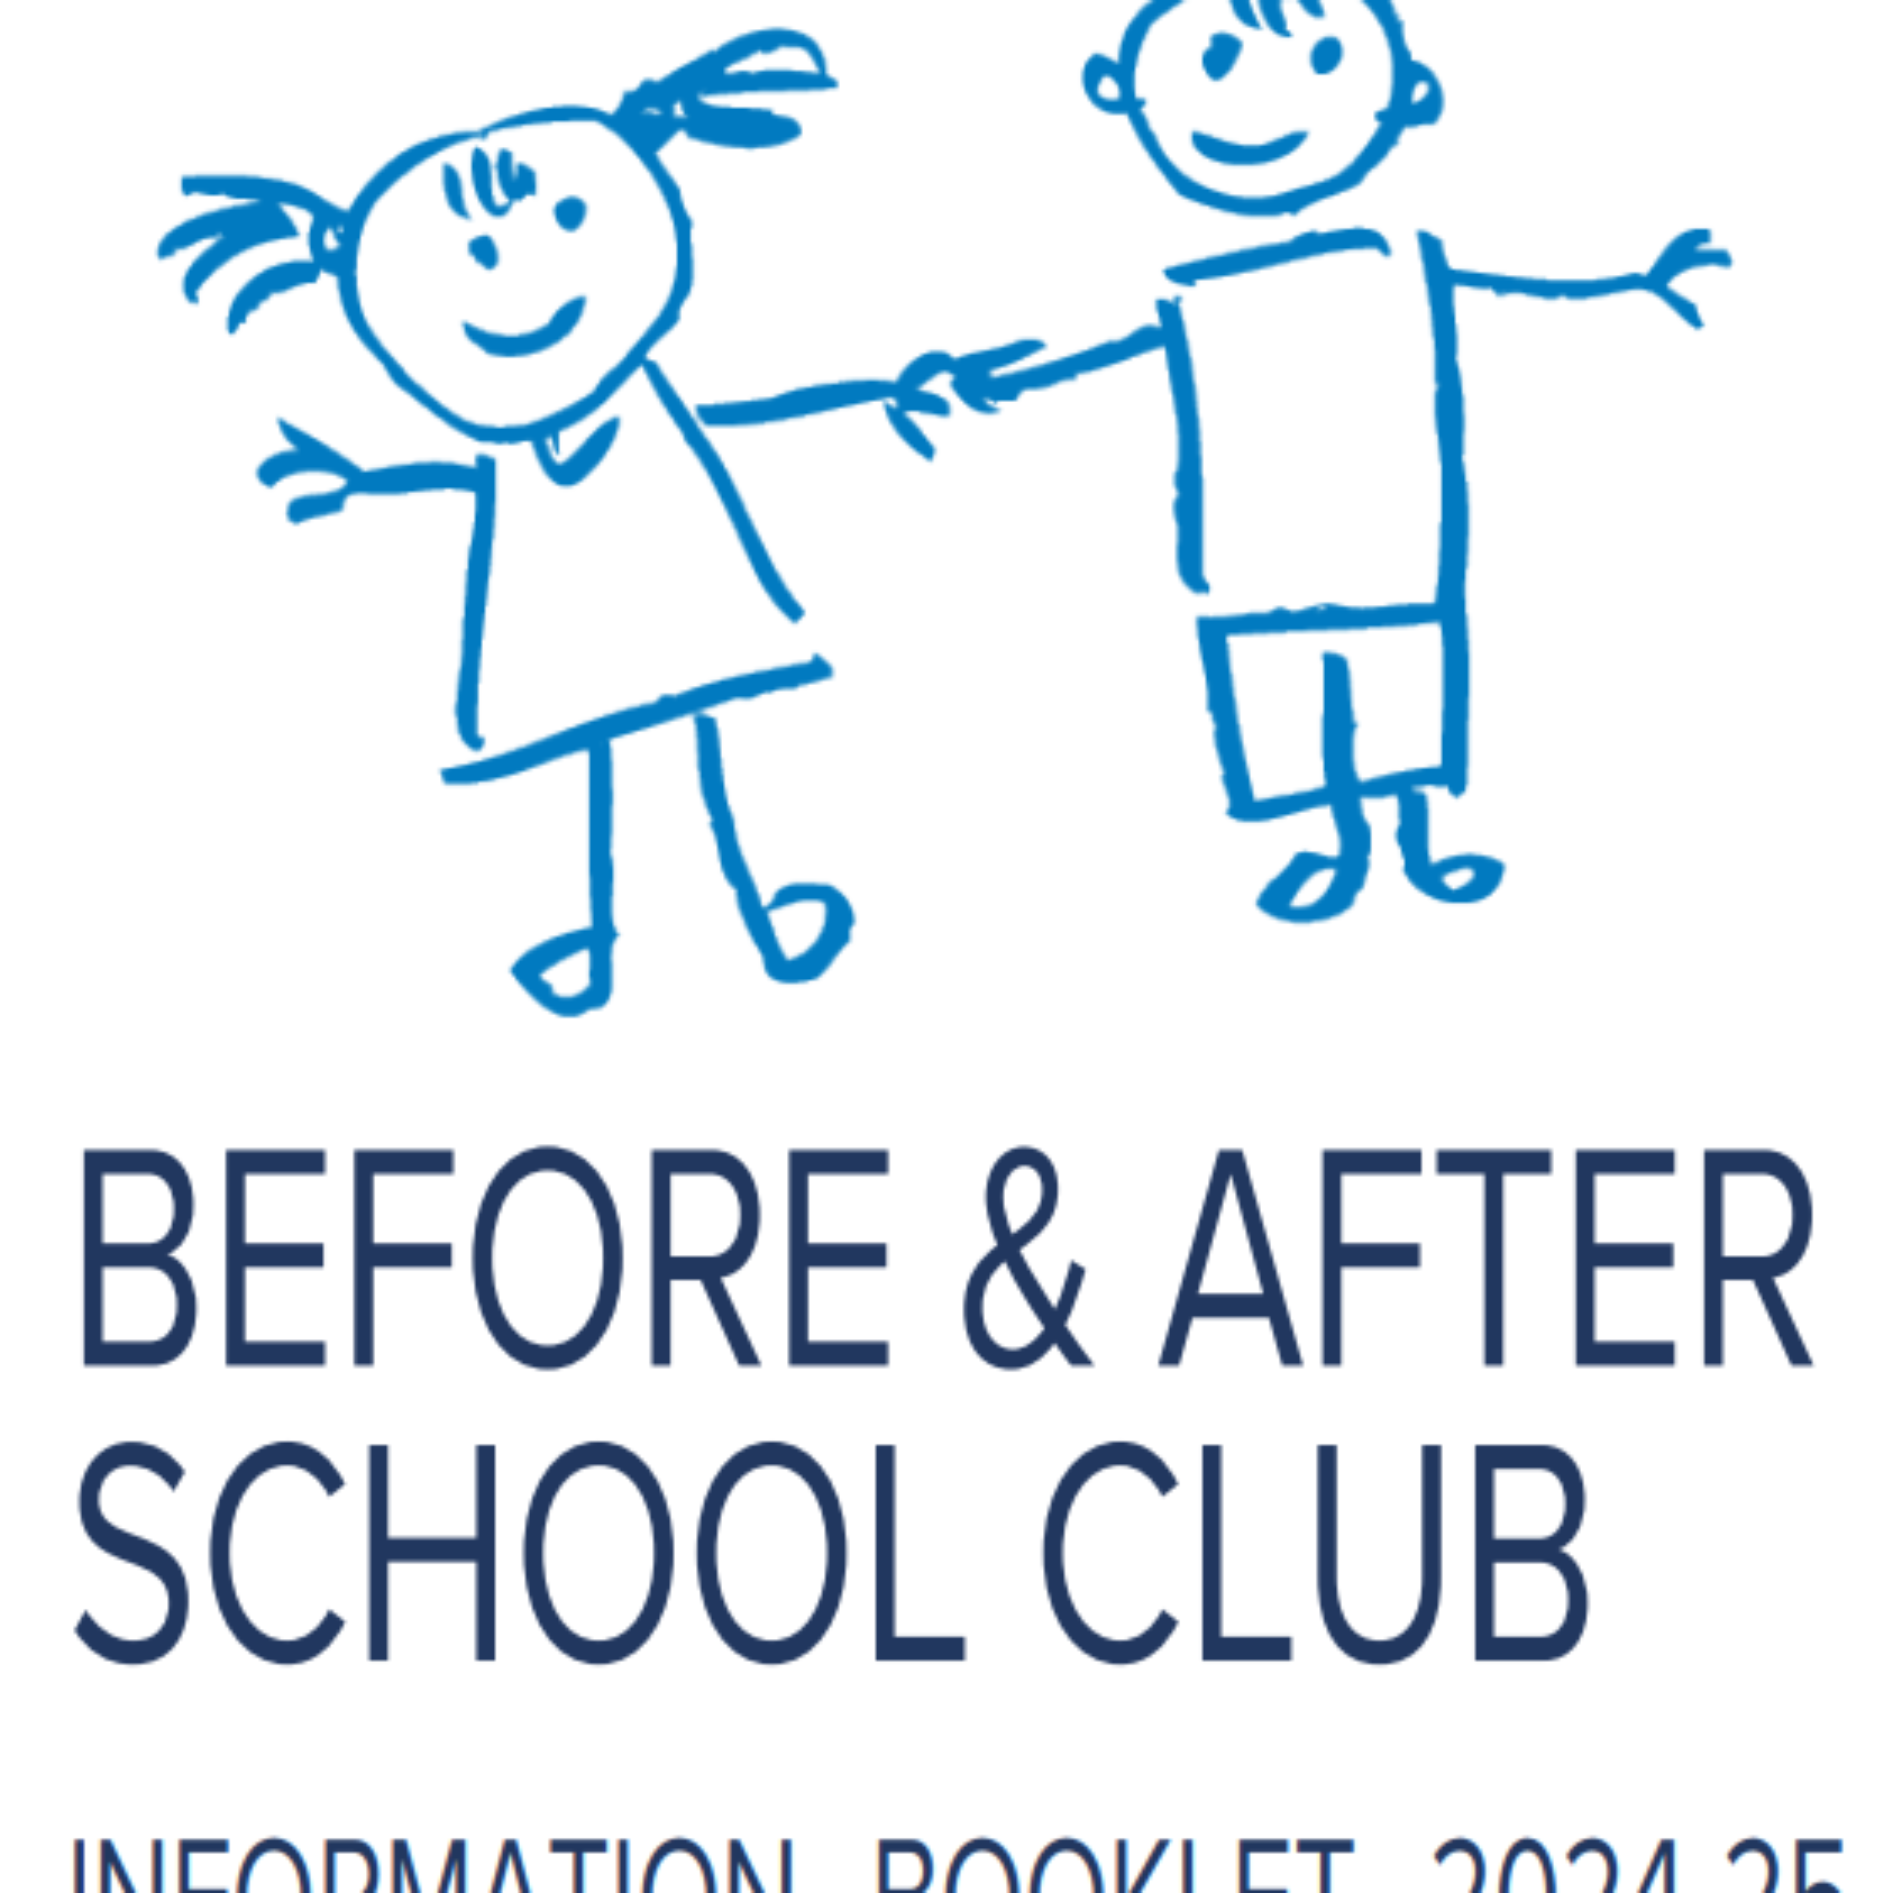 Before & After School Club